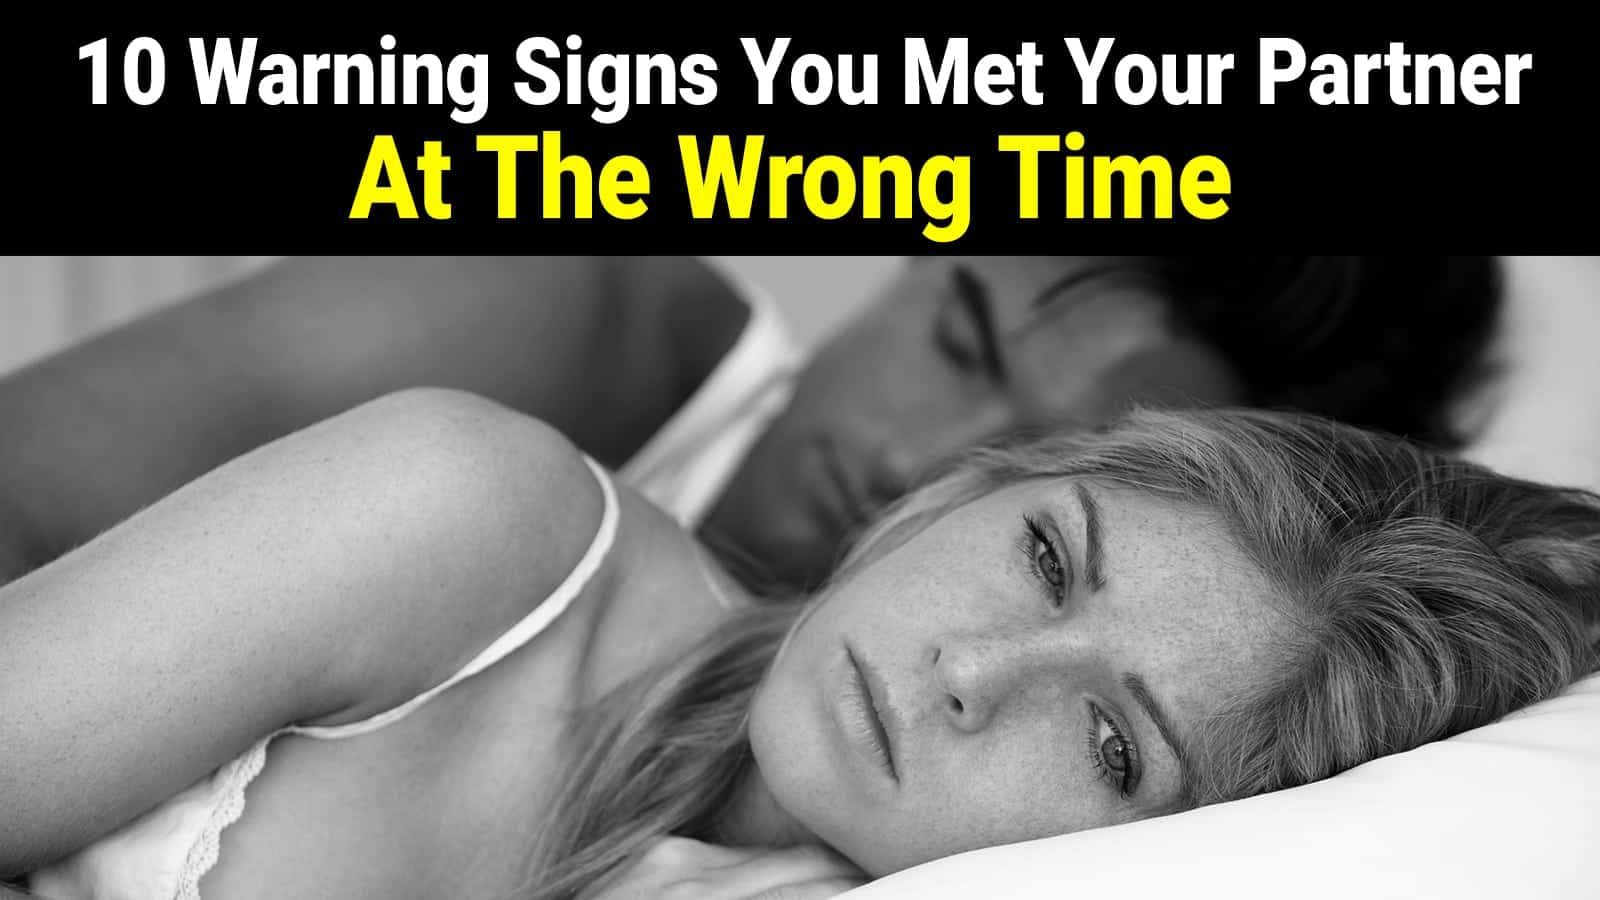 10 Warning Signs You Met Your Partner At The Wrong Time